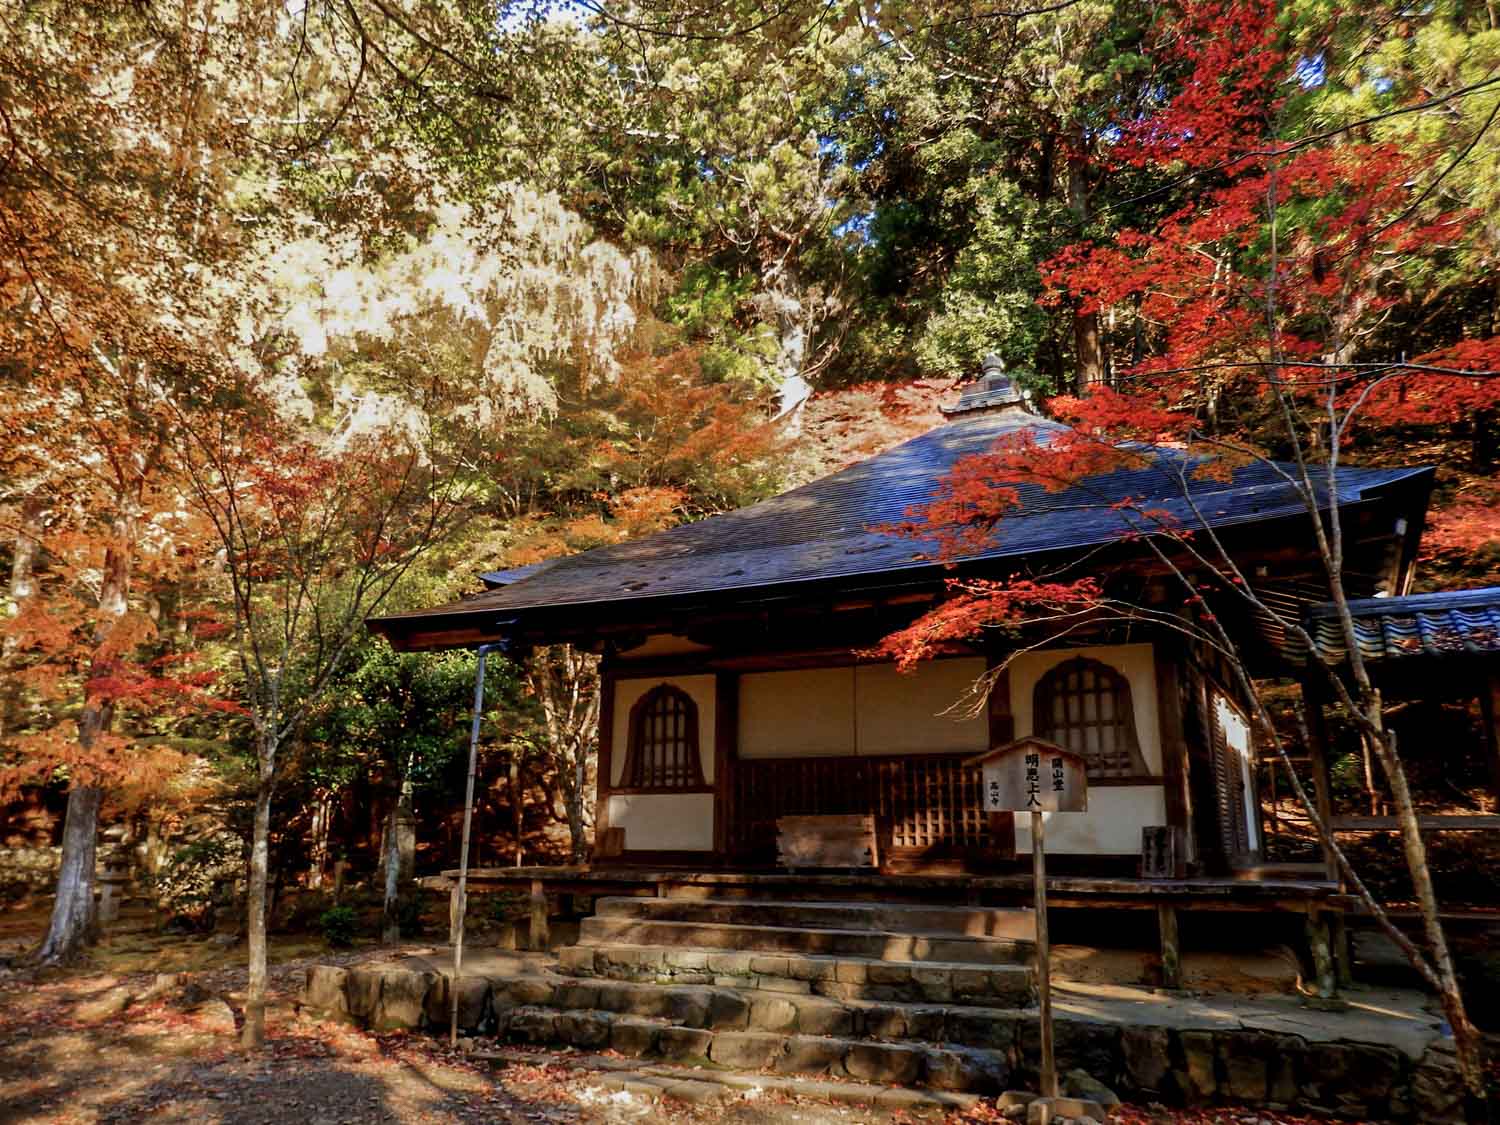 The 10 Best Autumn Leaves Spots In Kyoto You Should Visit